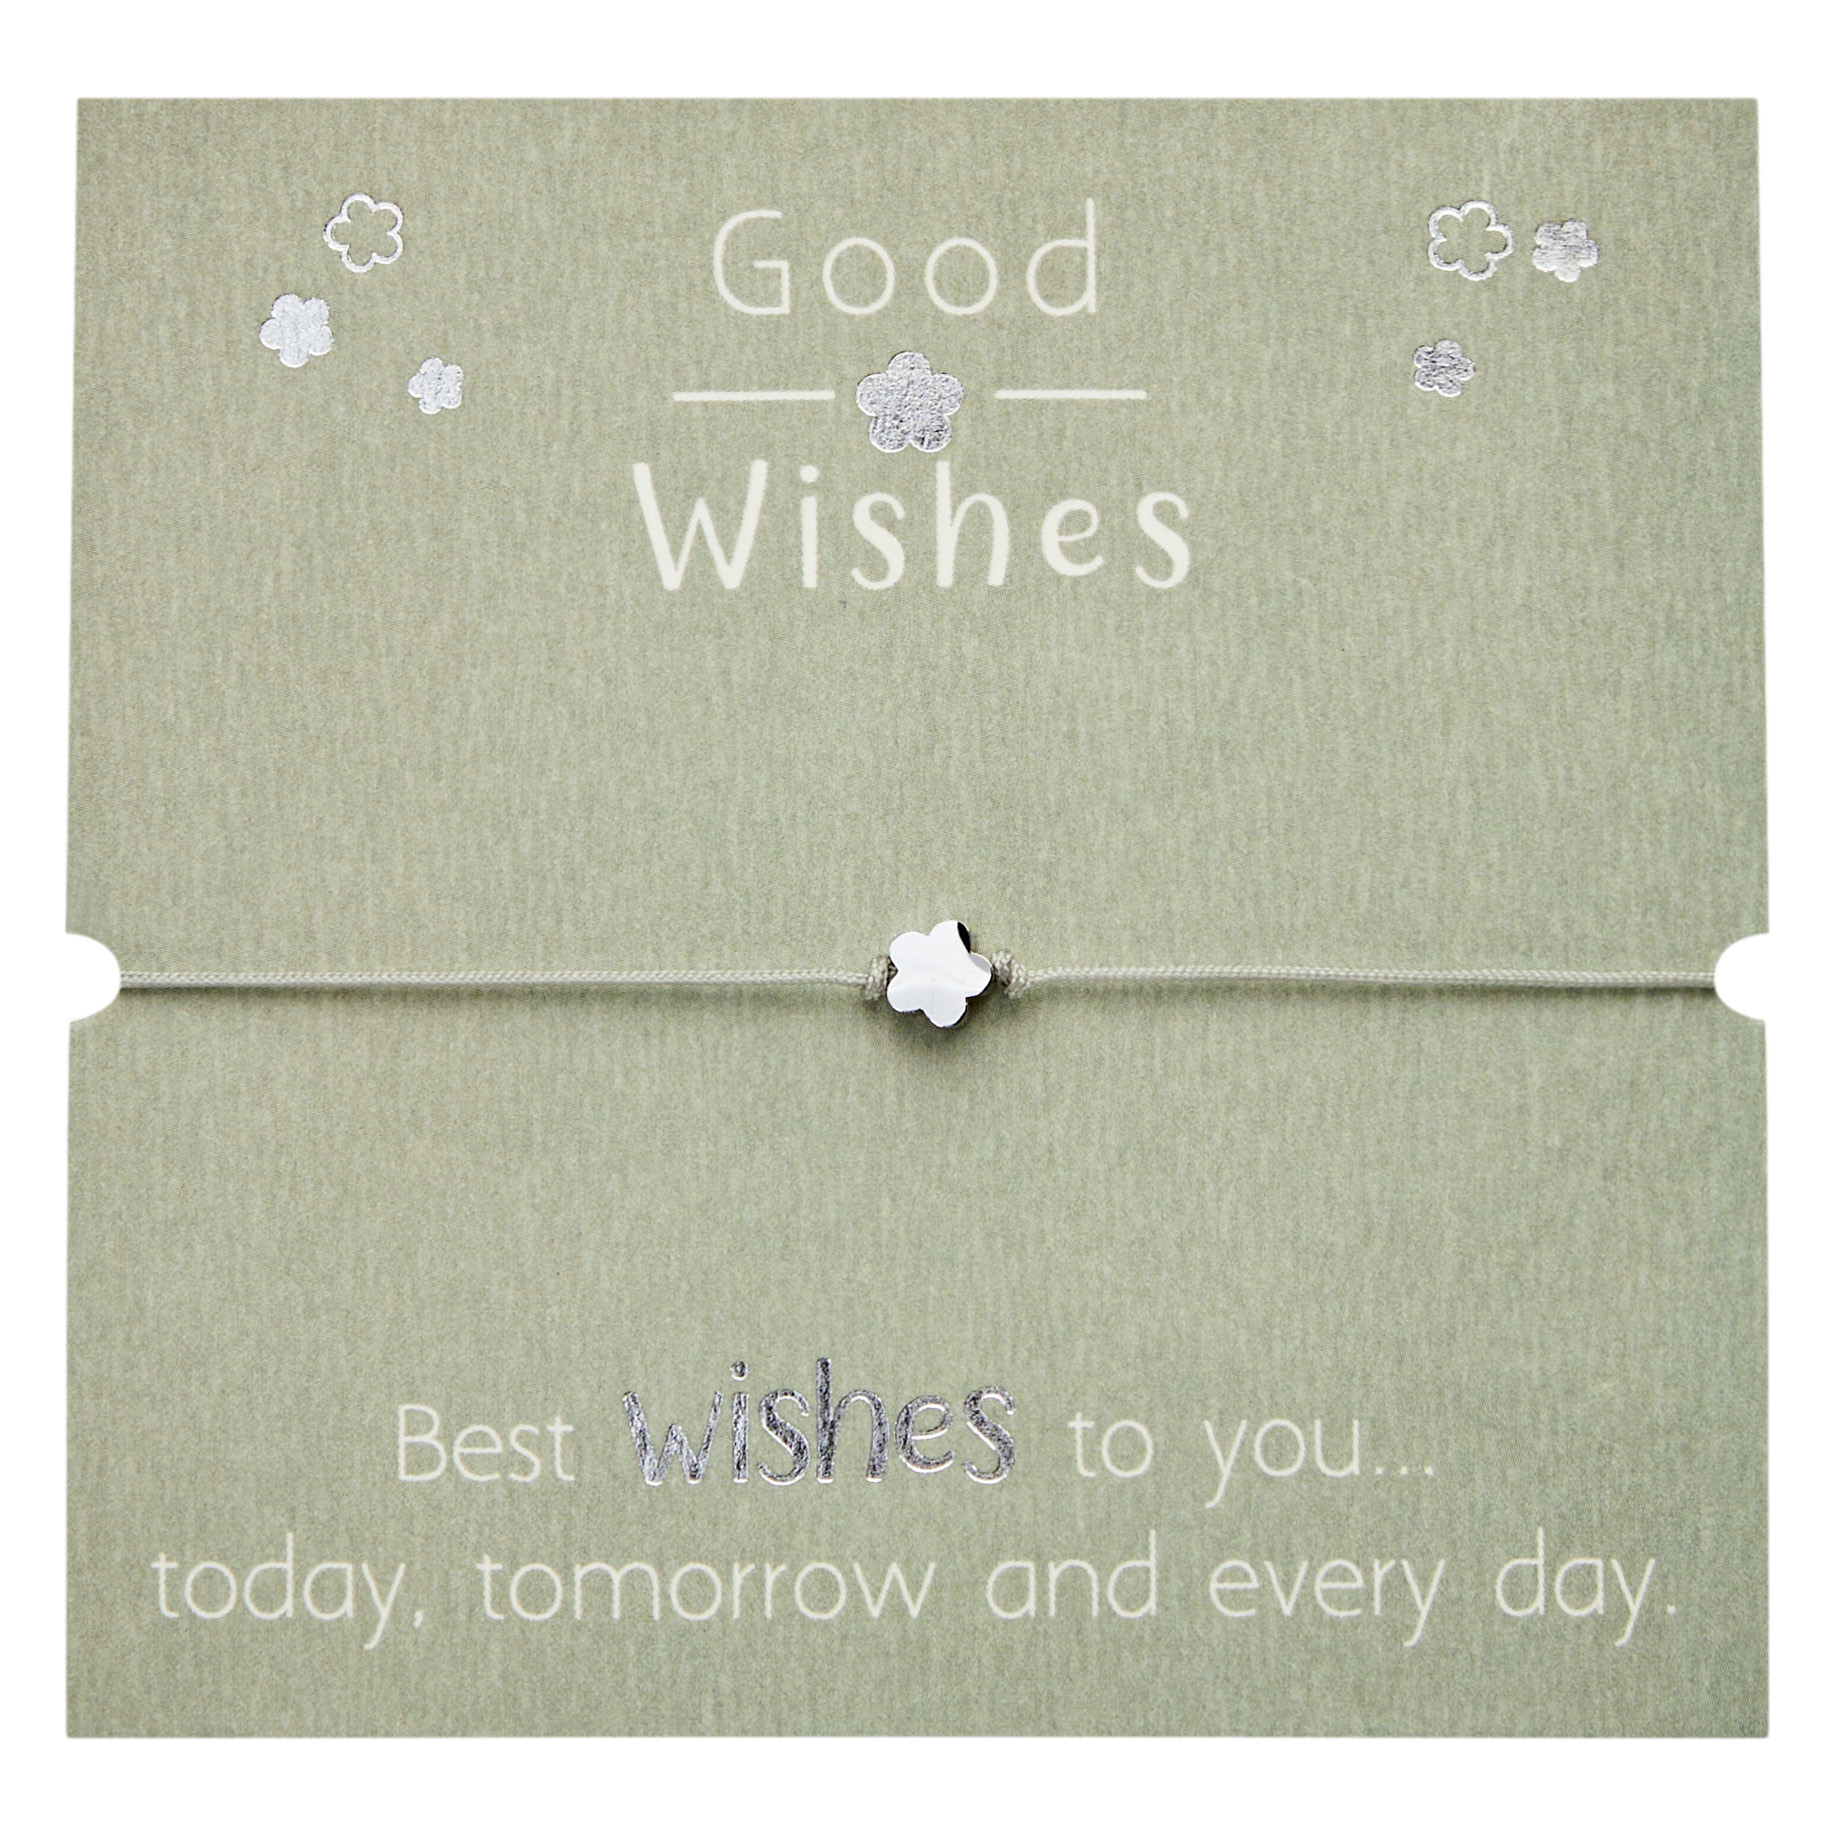 Armband - "Good Wishes" - Edelstahl - Blüte